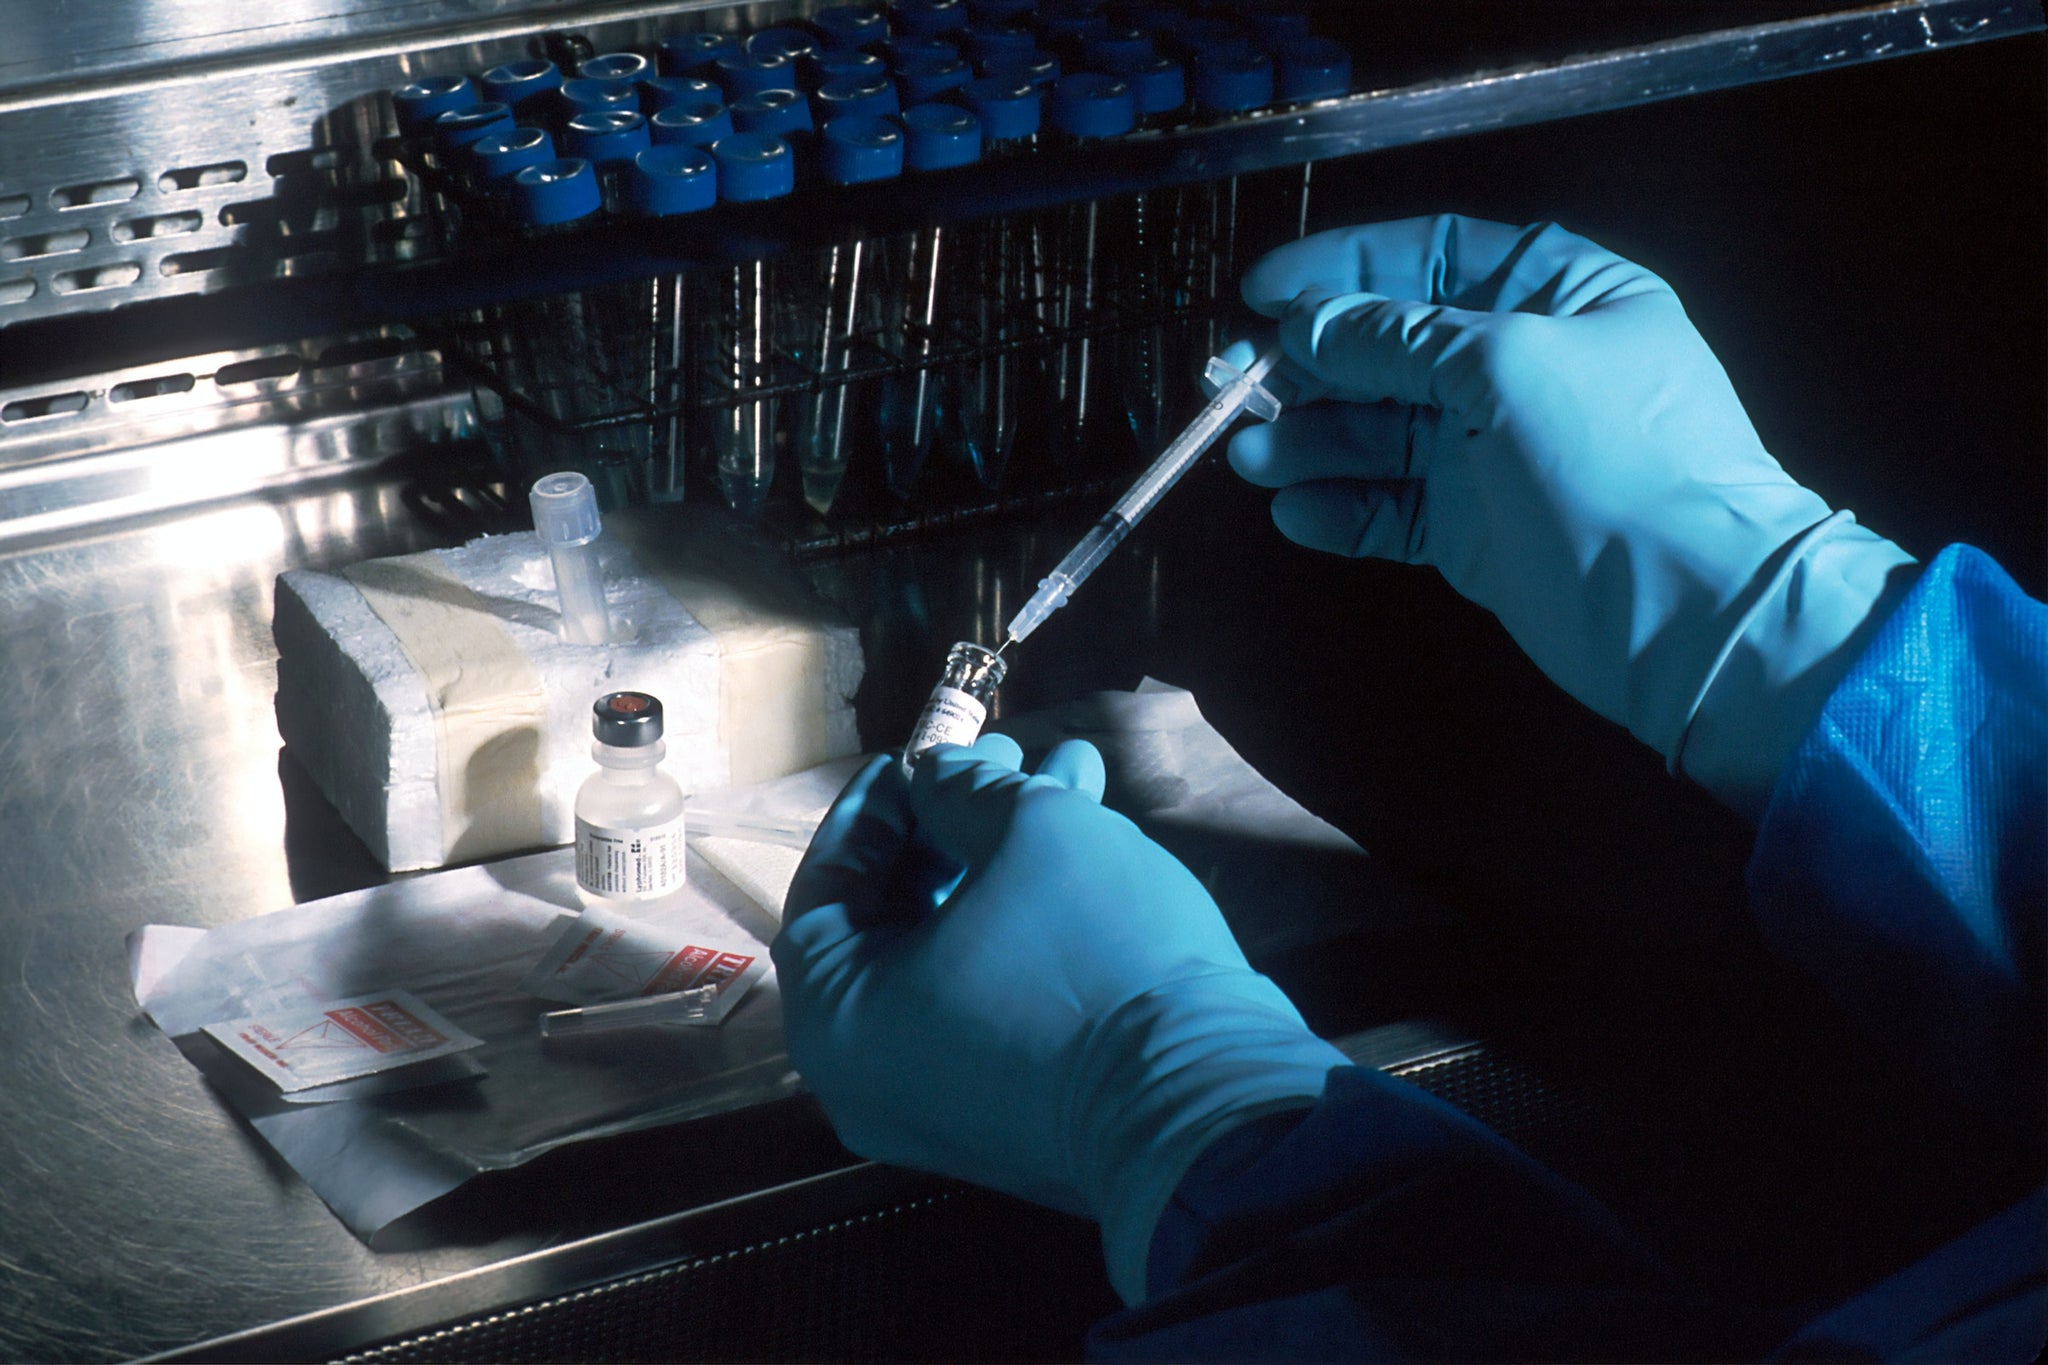 A lab technician uses a syringe to extract fluid from a test tube.